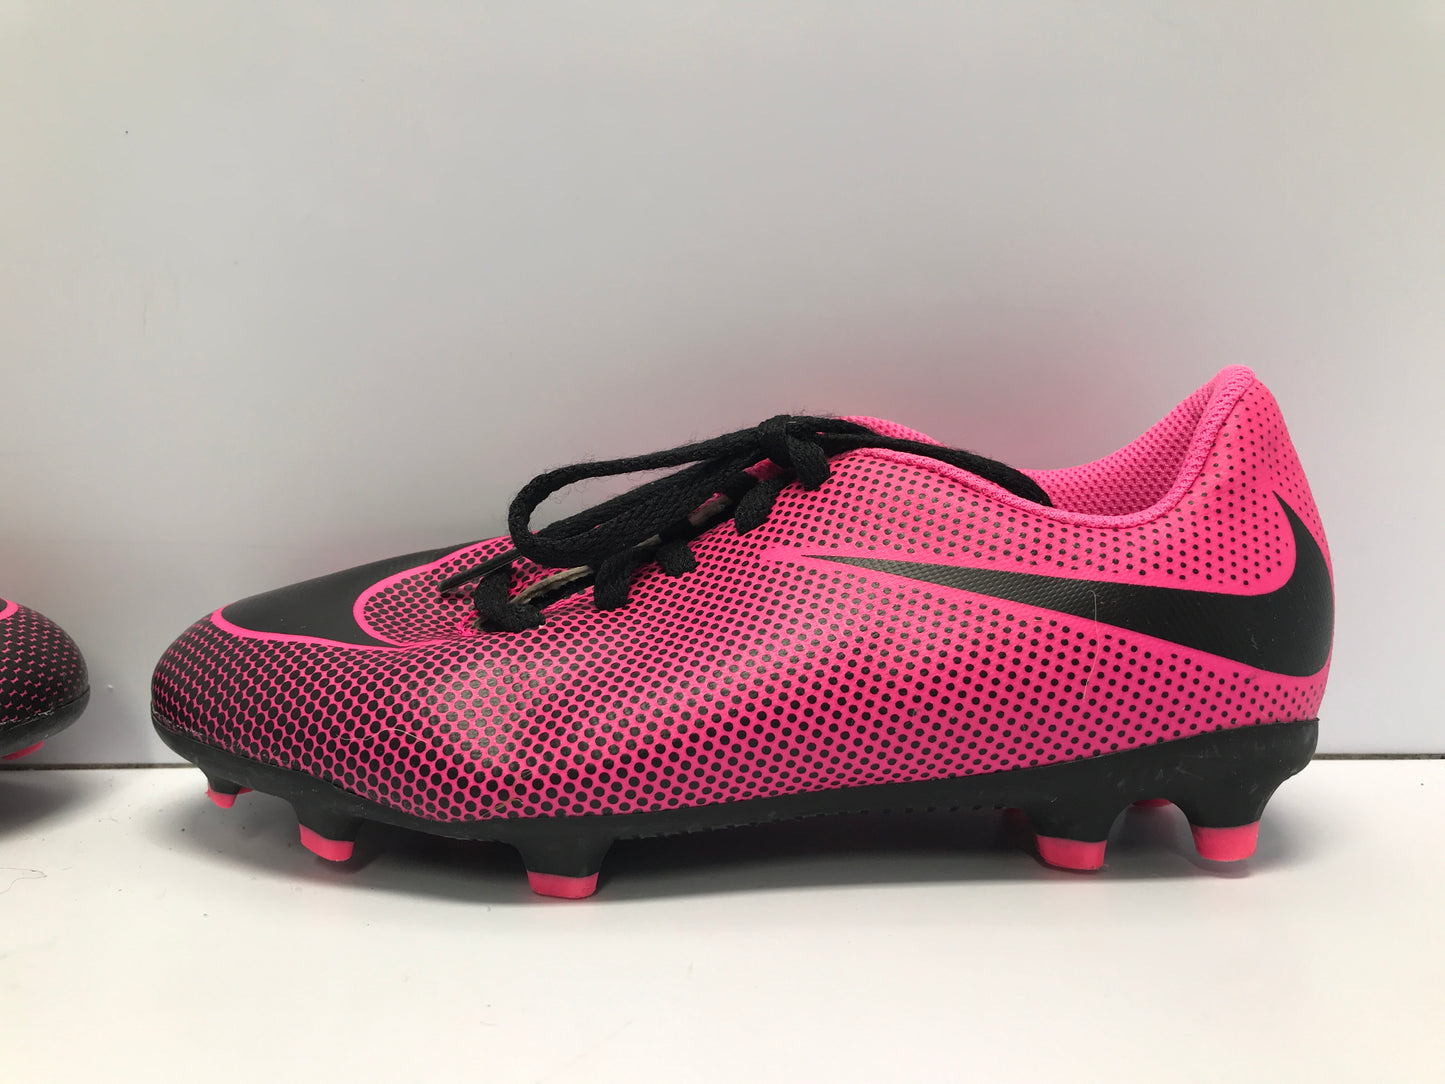 Soccer Shoes Cleats Child Size 2 Nike Black Pink Excellent